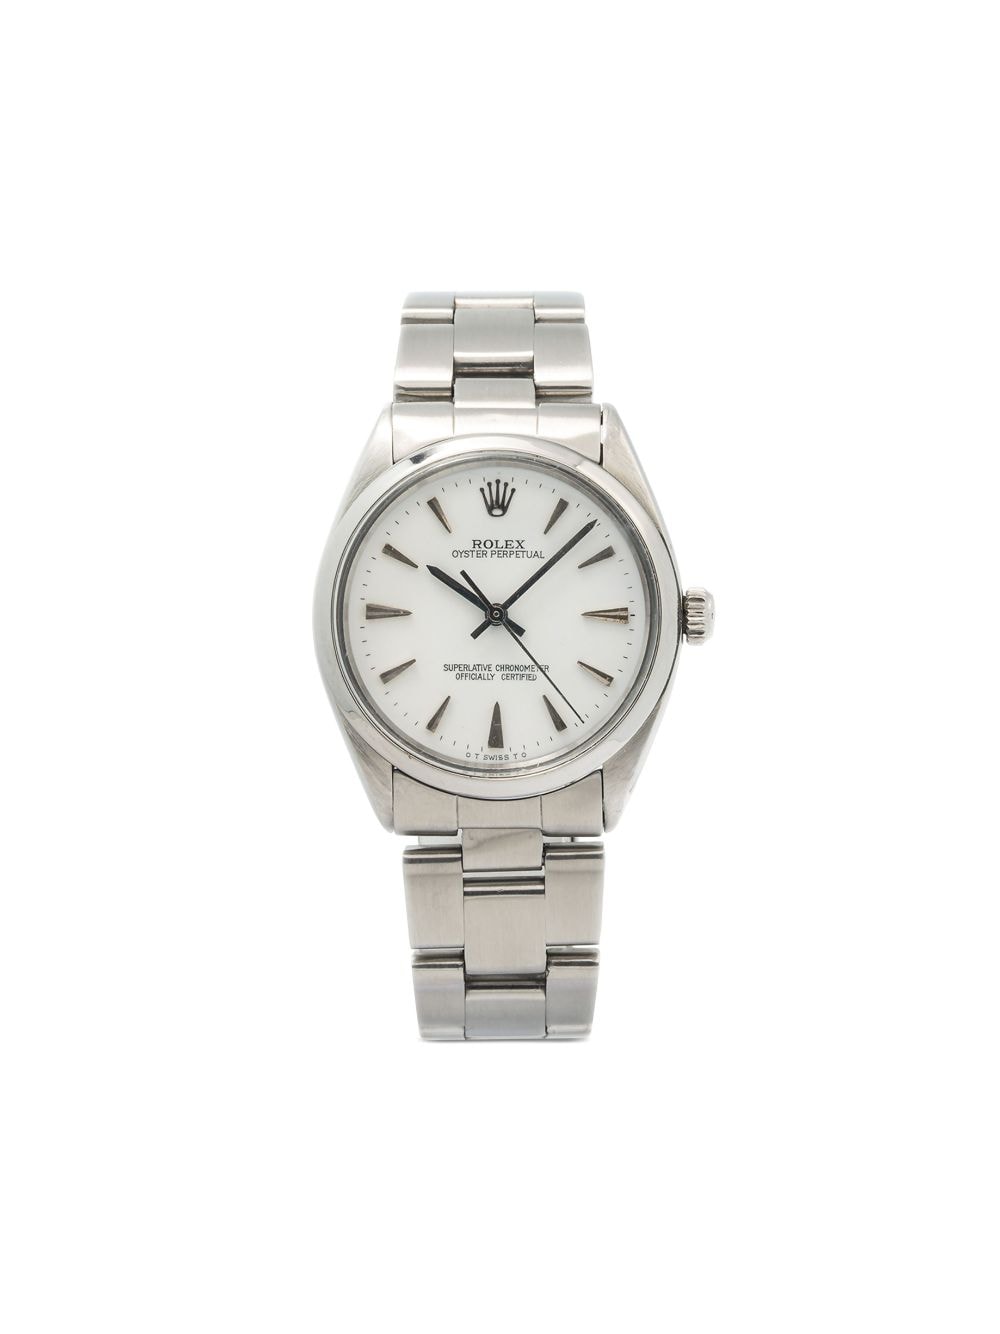 Rolex pre-owned Oyster Perpetual 34mm - White von Rolex